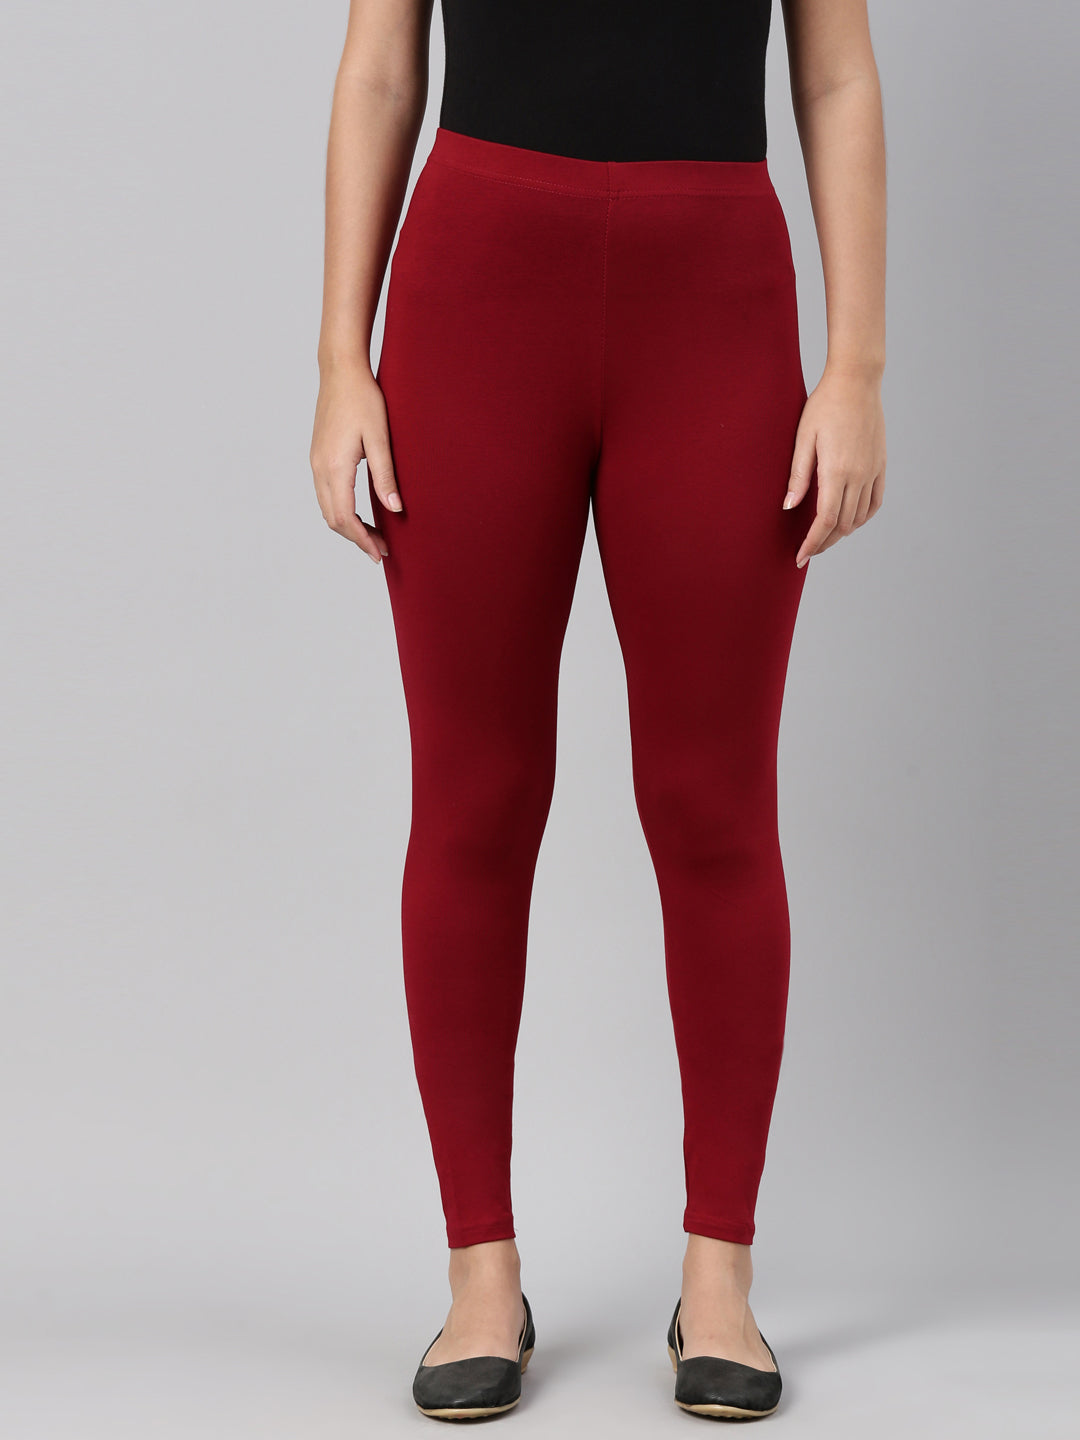 Women Solid Bright Red Slim Fit Ankle Length Leggings - Tall